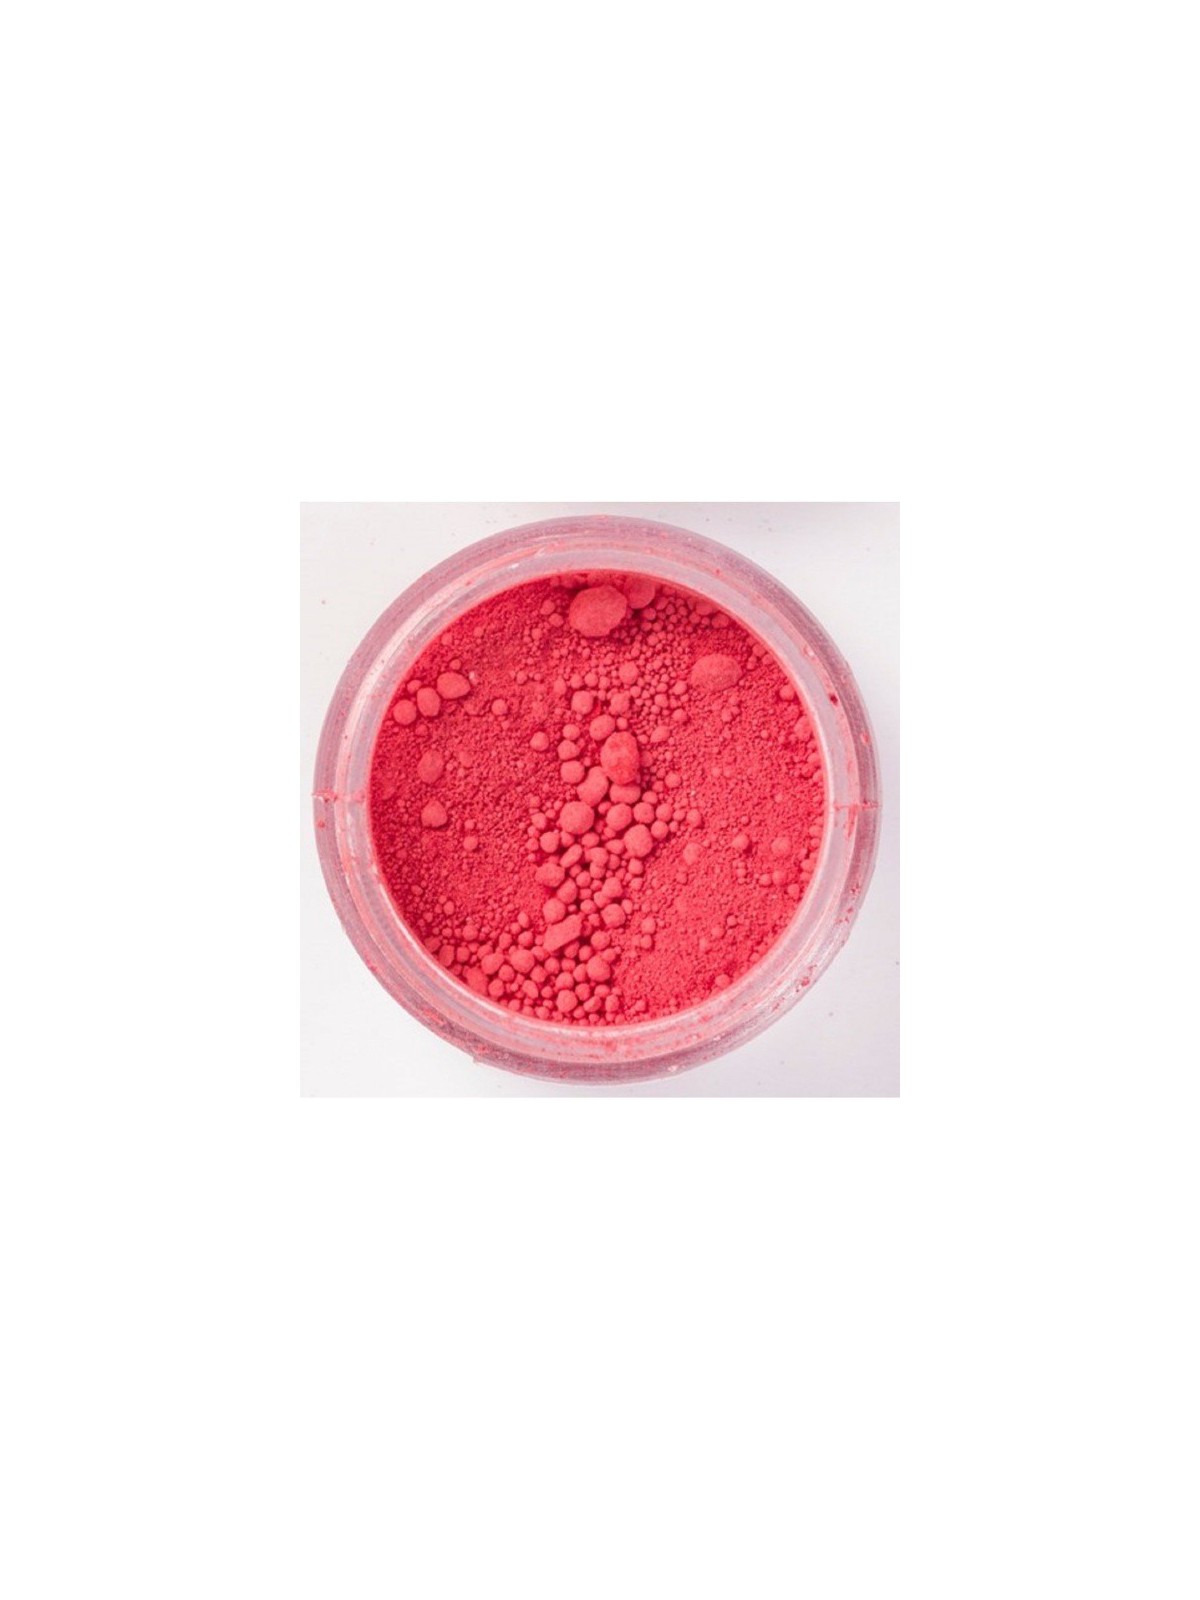 RD powder colour red - STRAWBERRY